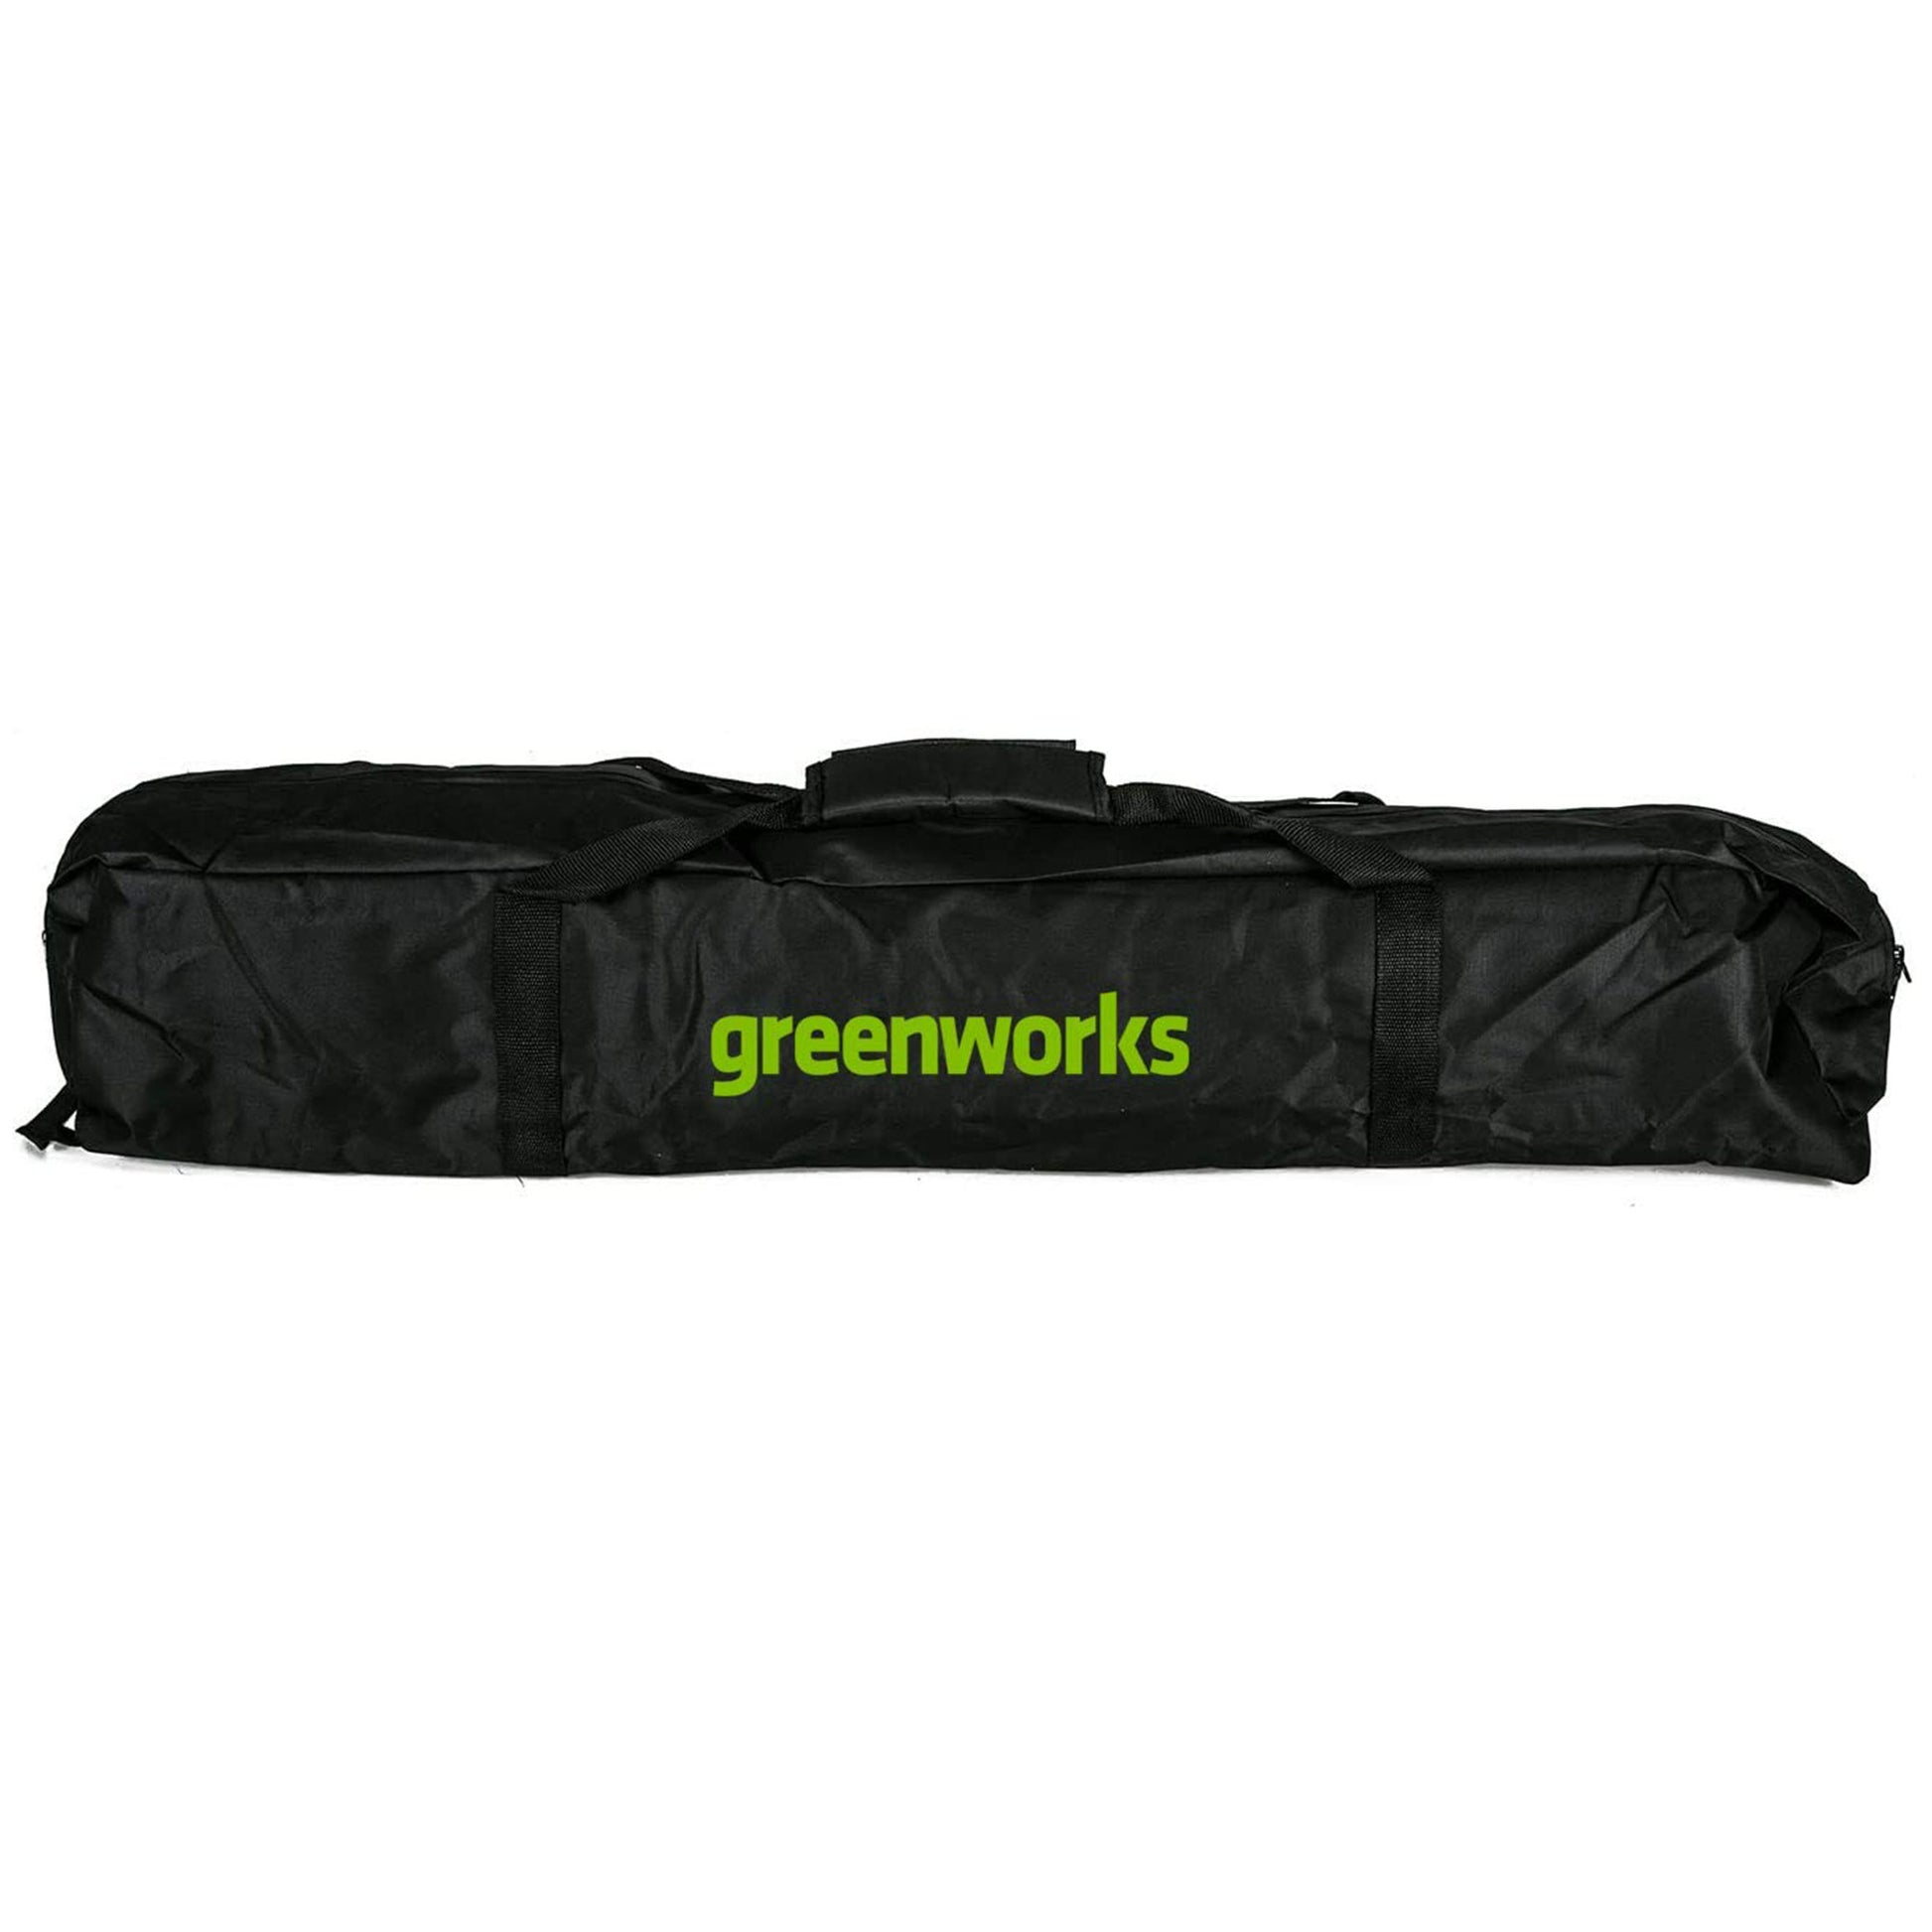 Greenworks PC0A00 Universal Pole Saw Carry Case